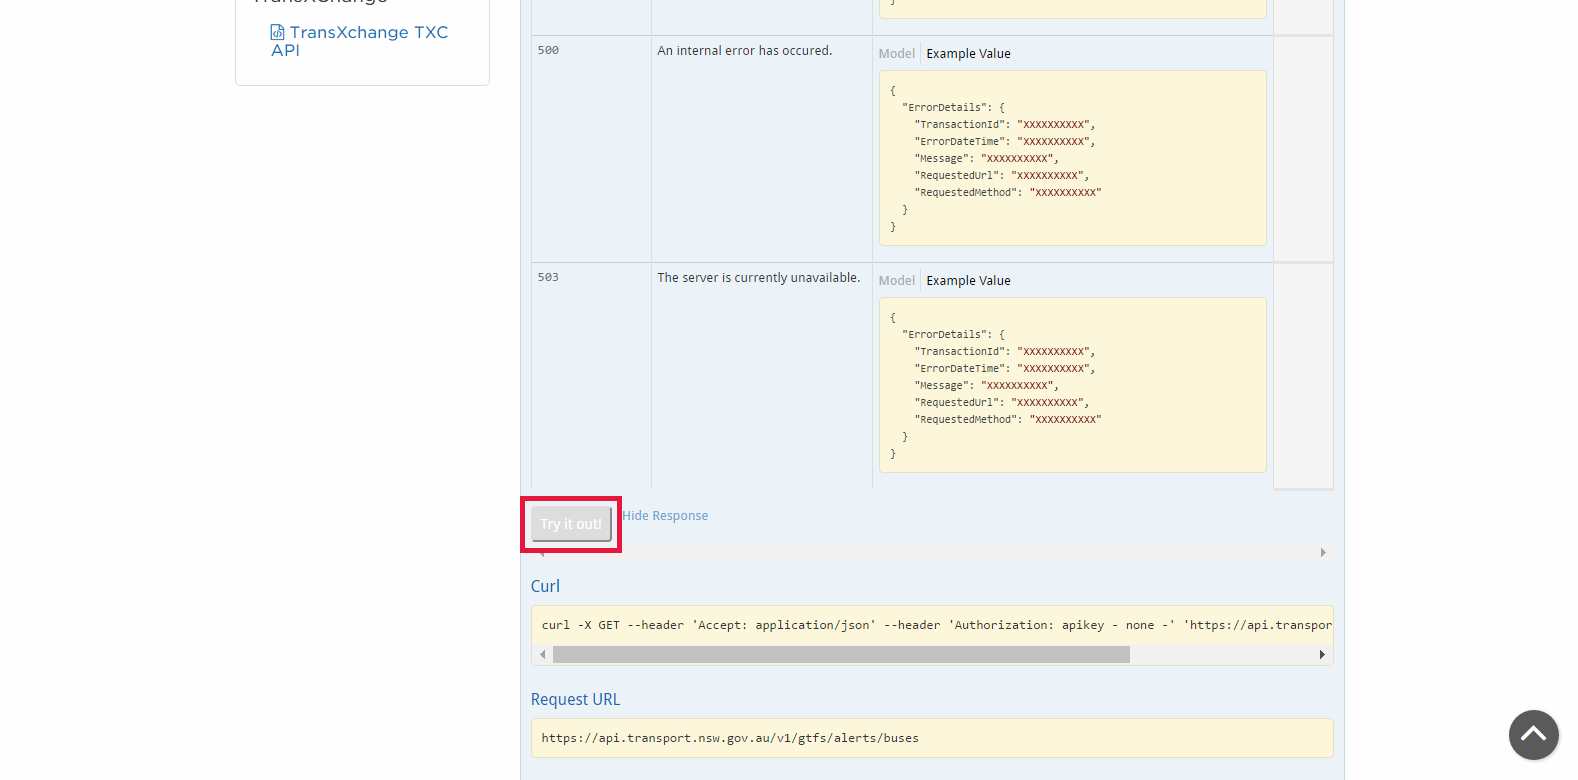 Image of the API explorer showing the query response, request URL and curl command